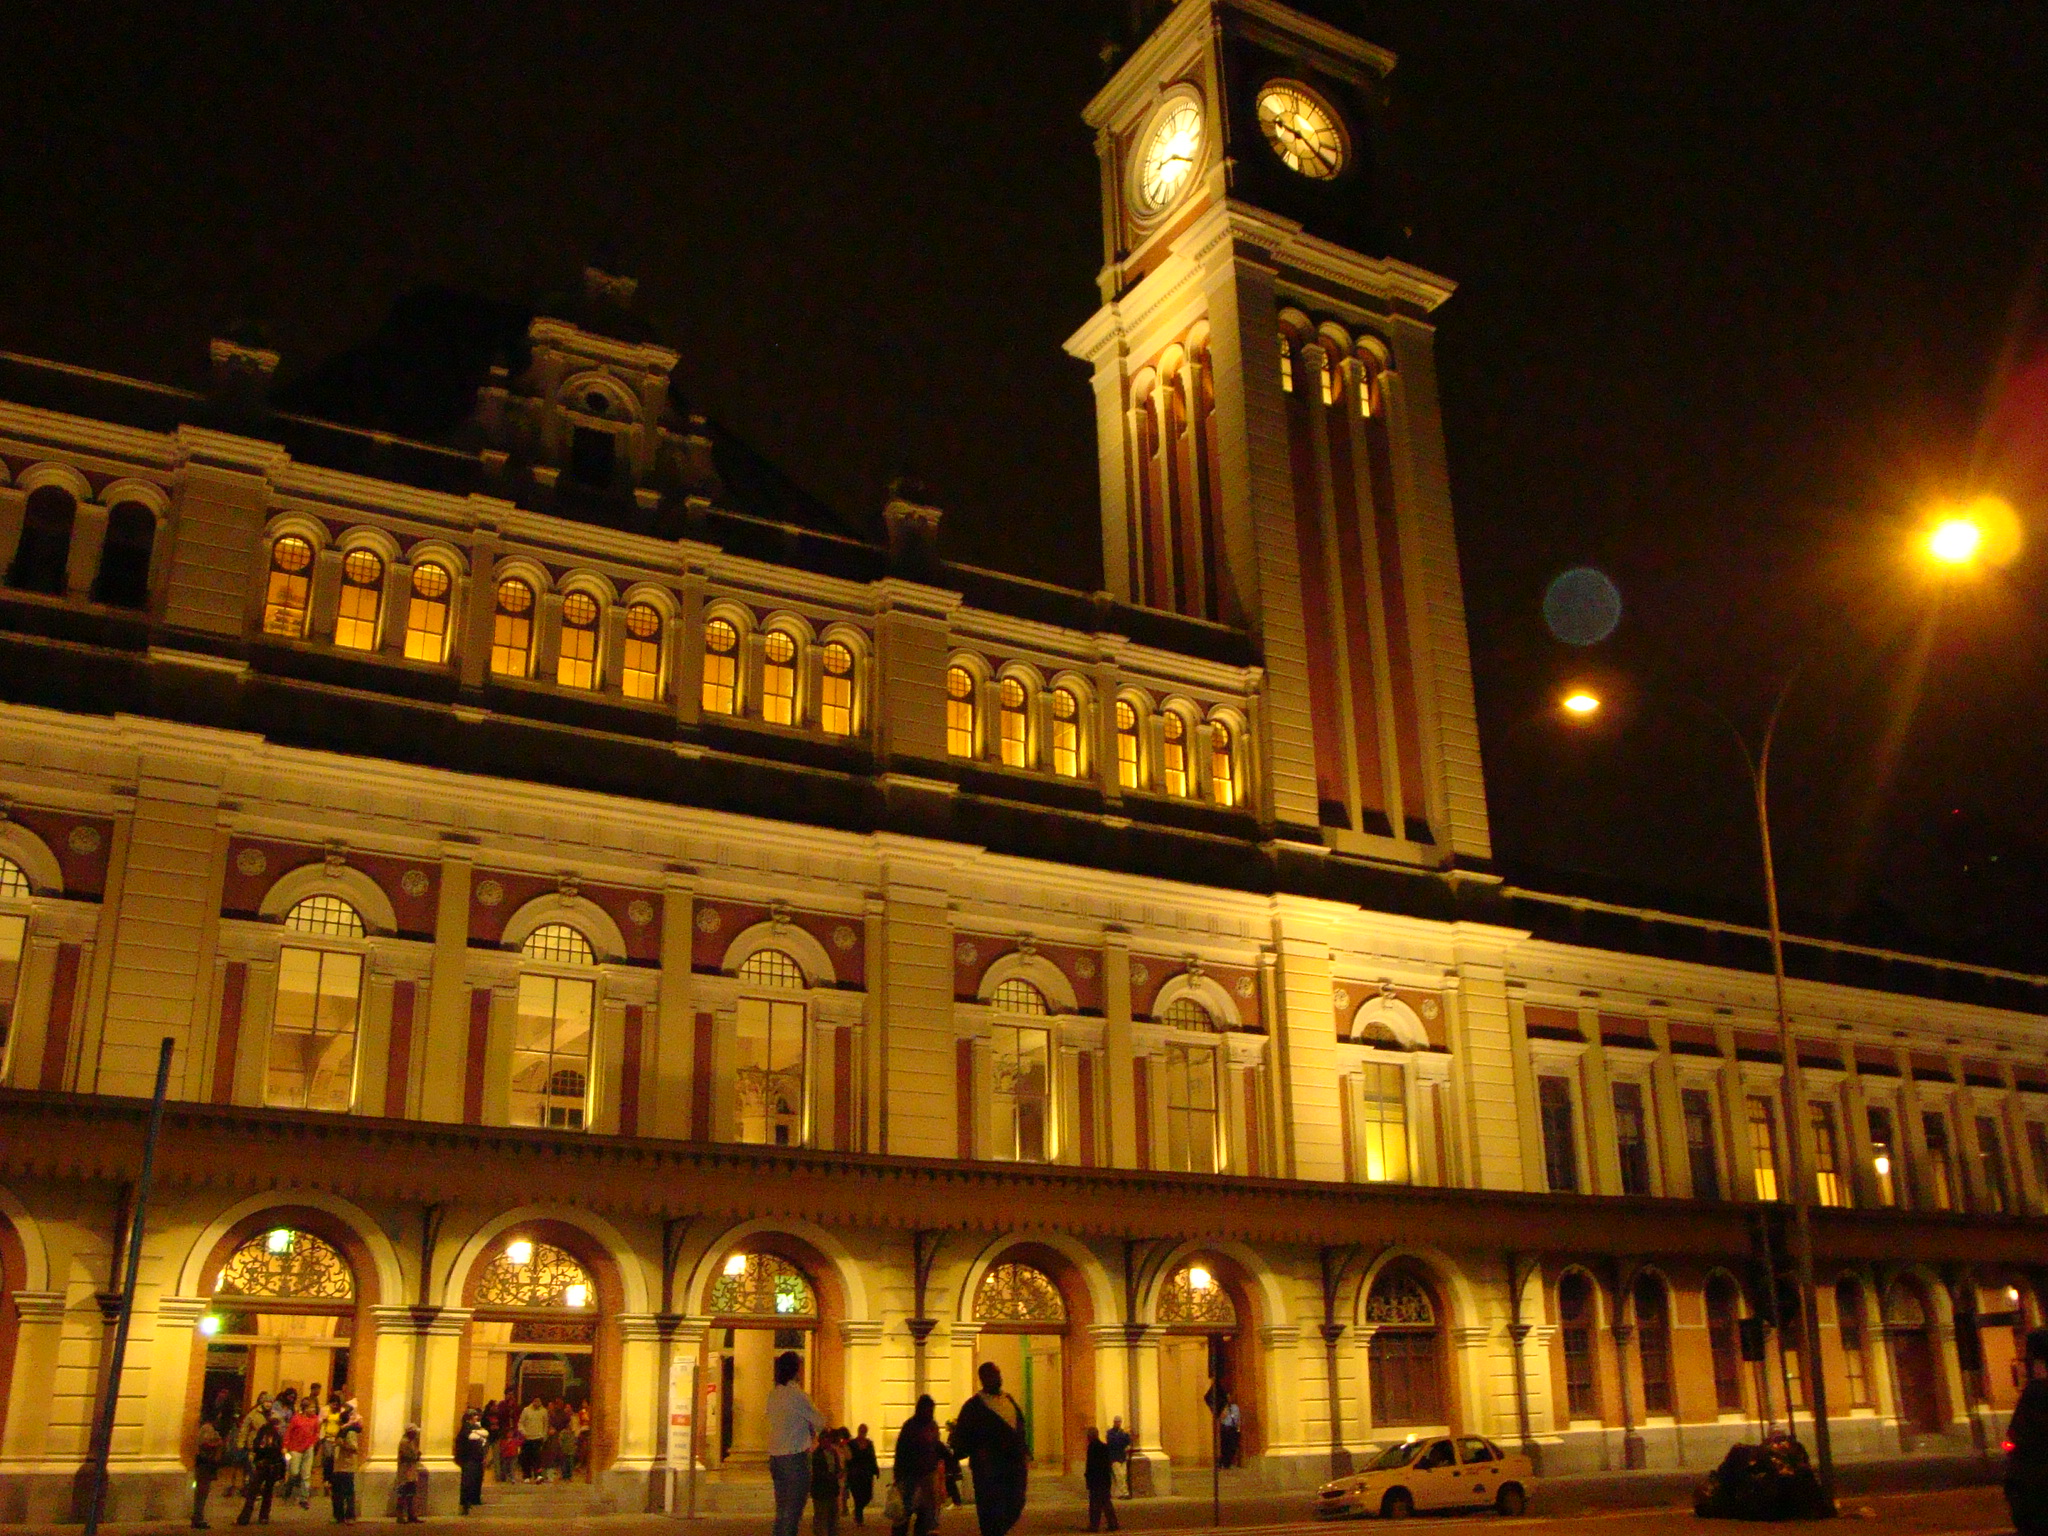 a large clock tower sits over the front of a building